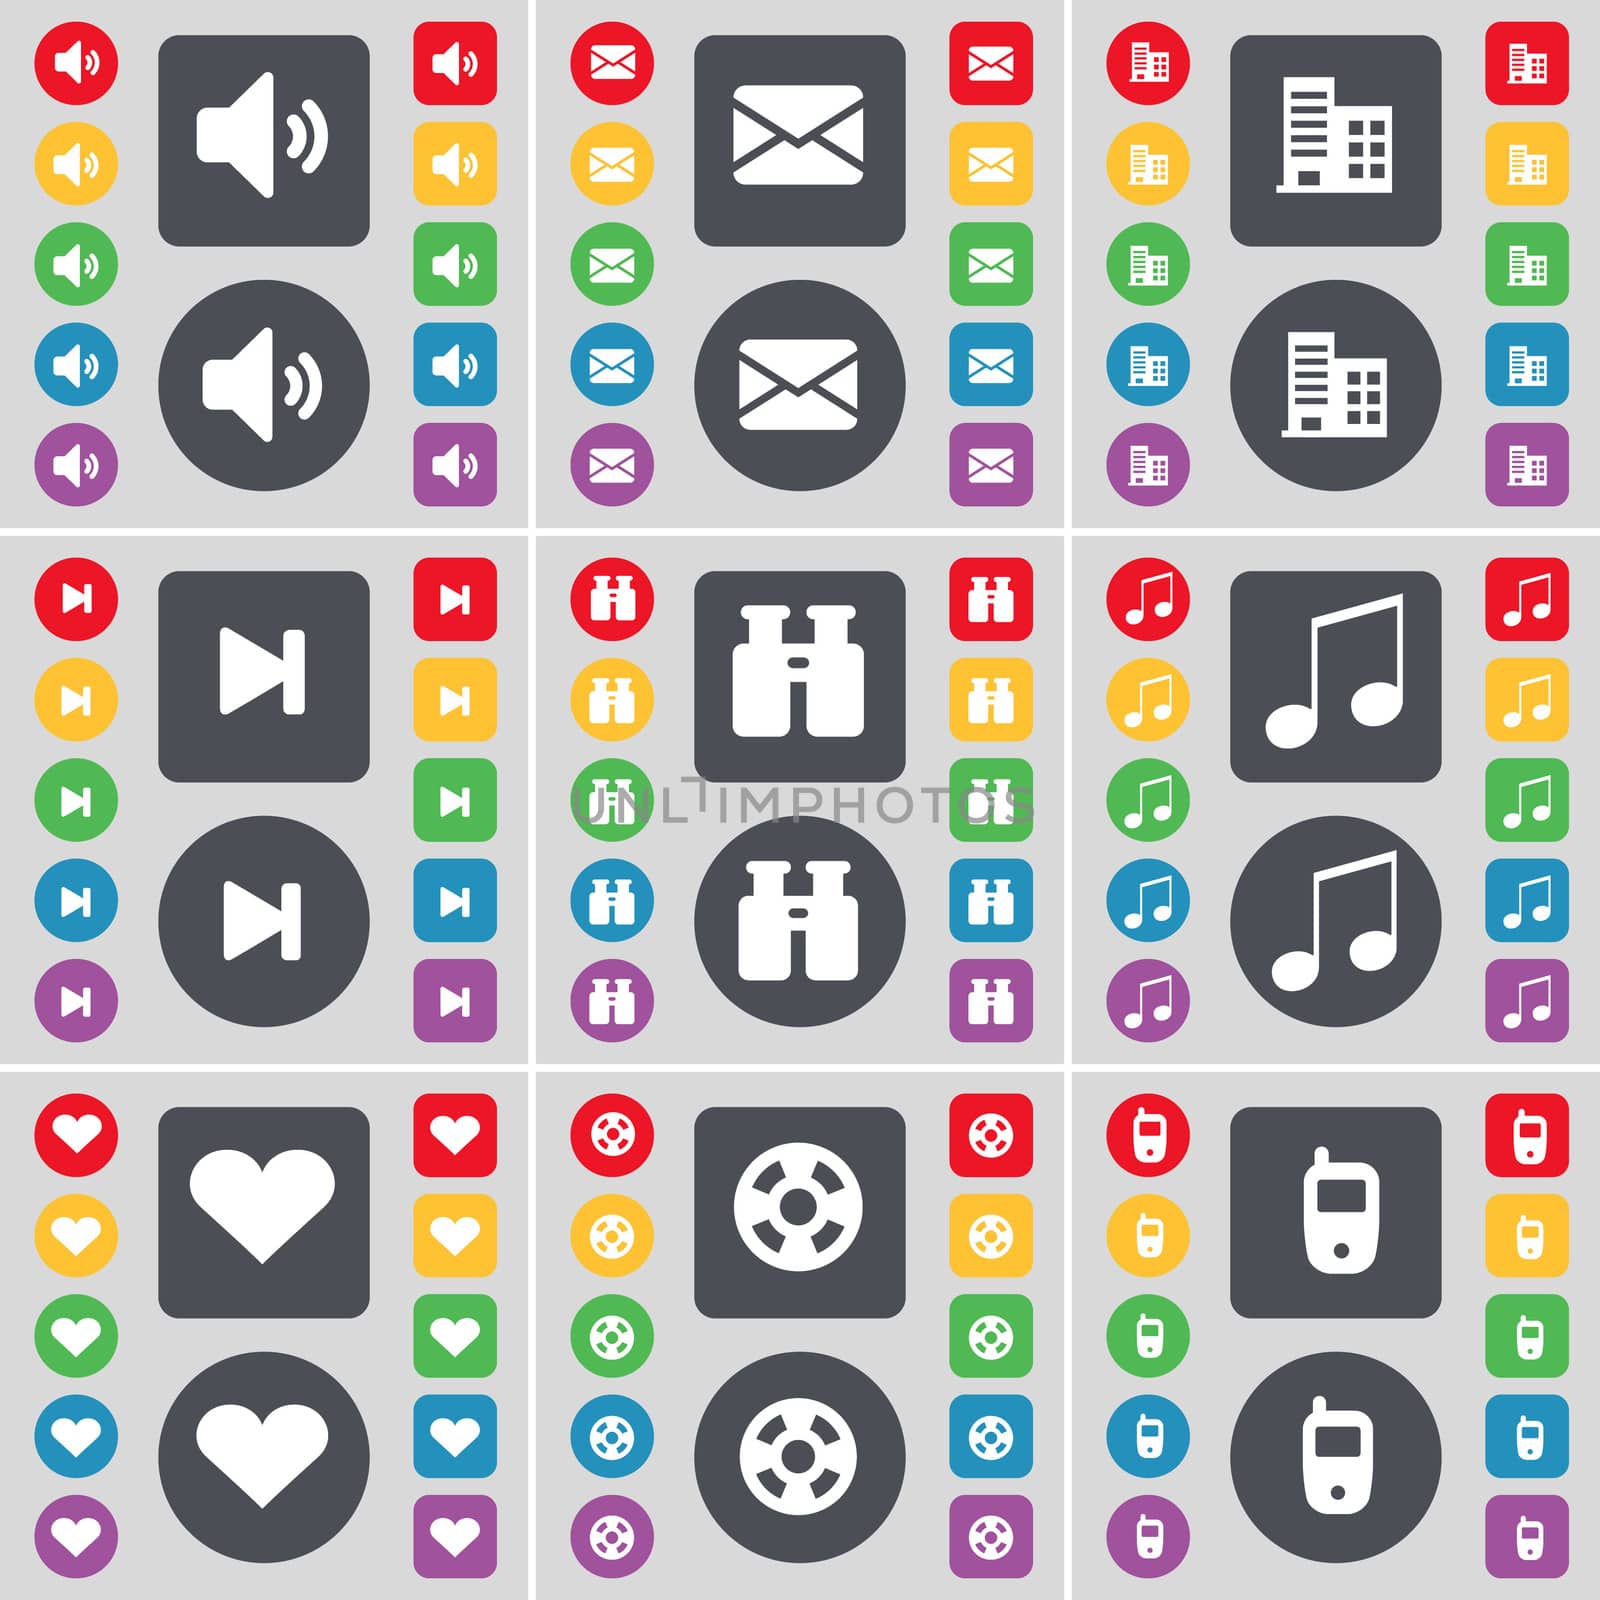 Sound, Message, Building, Media skip, Binoculars, Note, Heart, Videotape, Mobile phone icon symbol. A large set of flat, colored buttons for your design. illustration